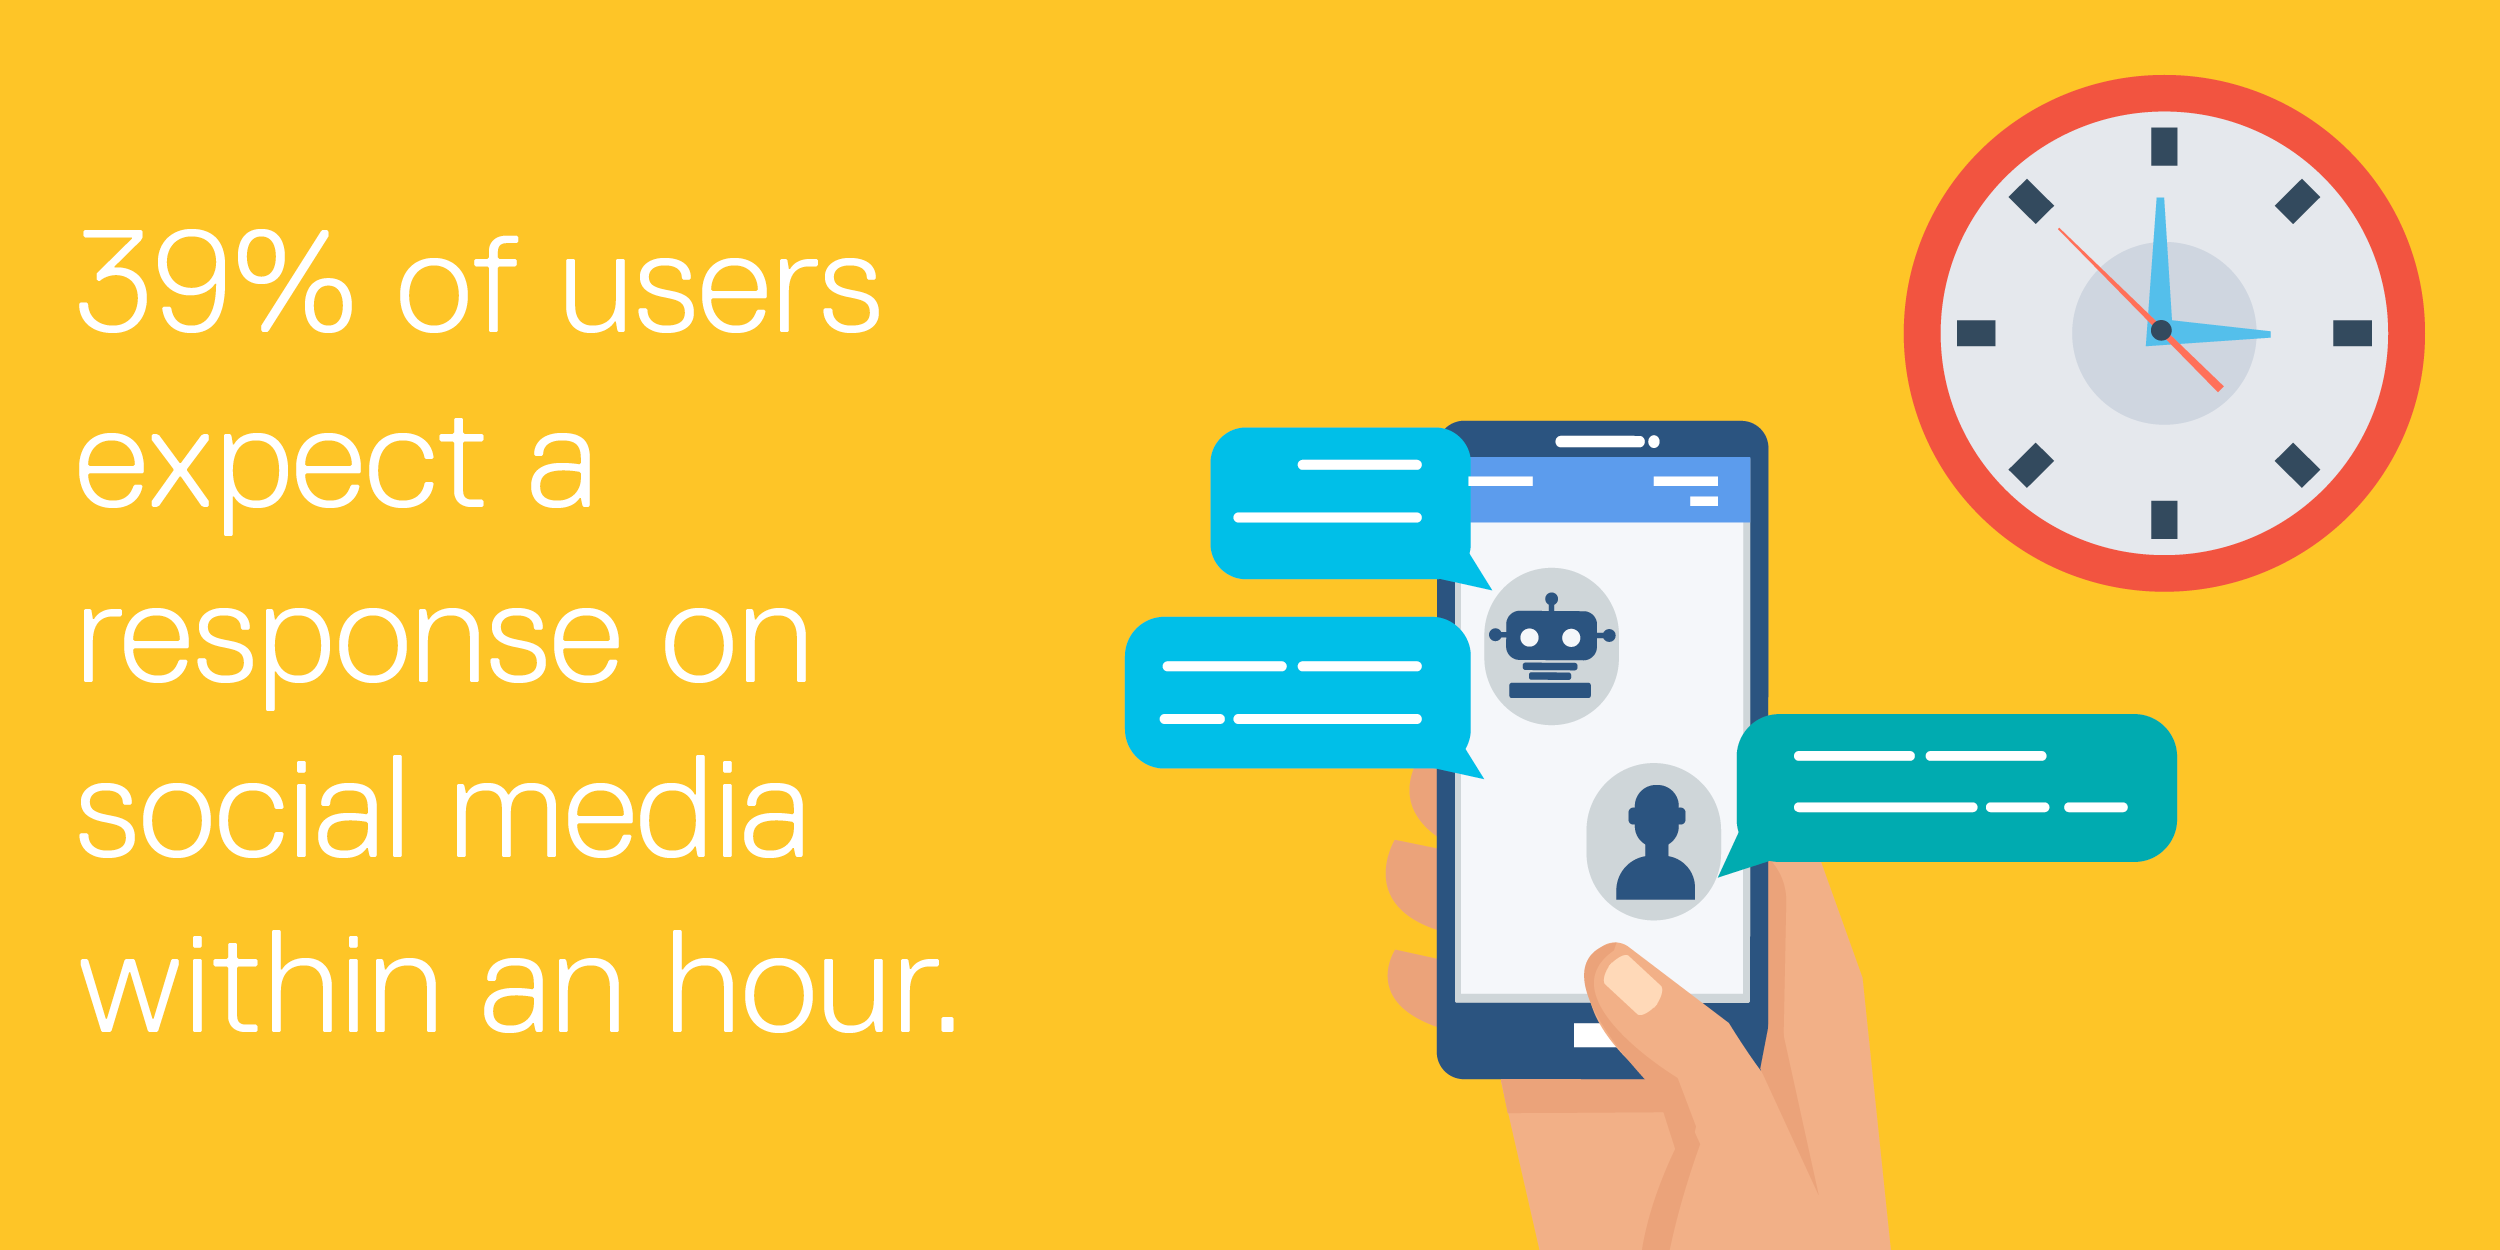 39% of users expect a response on social media within an hour.